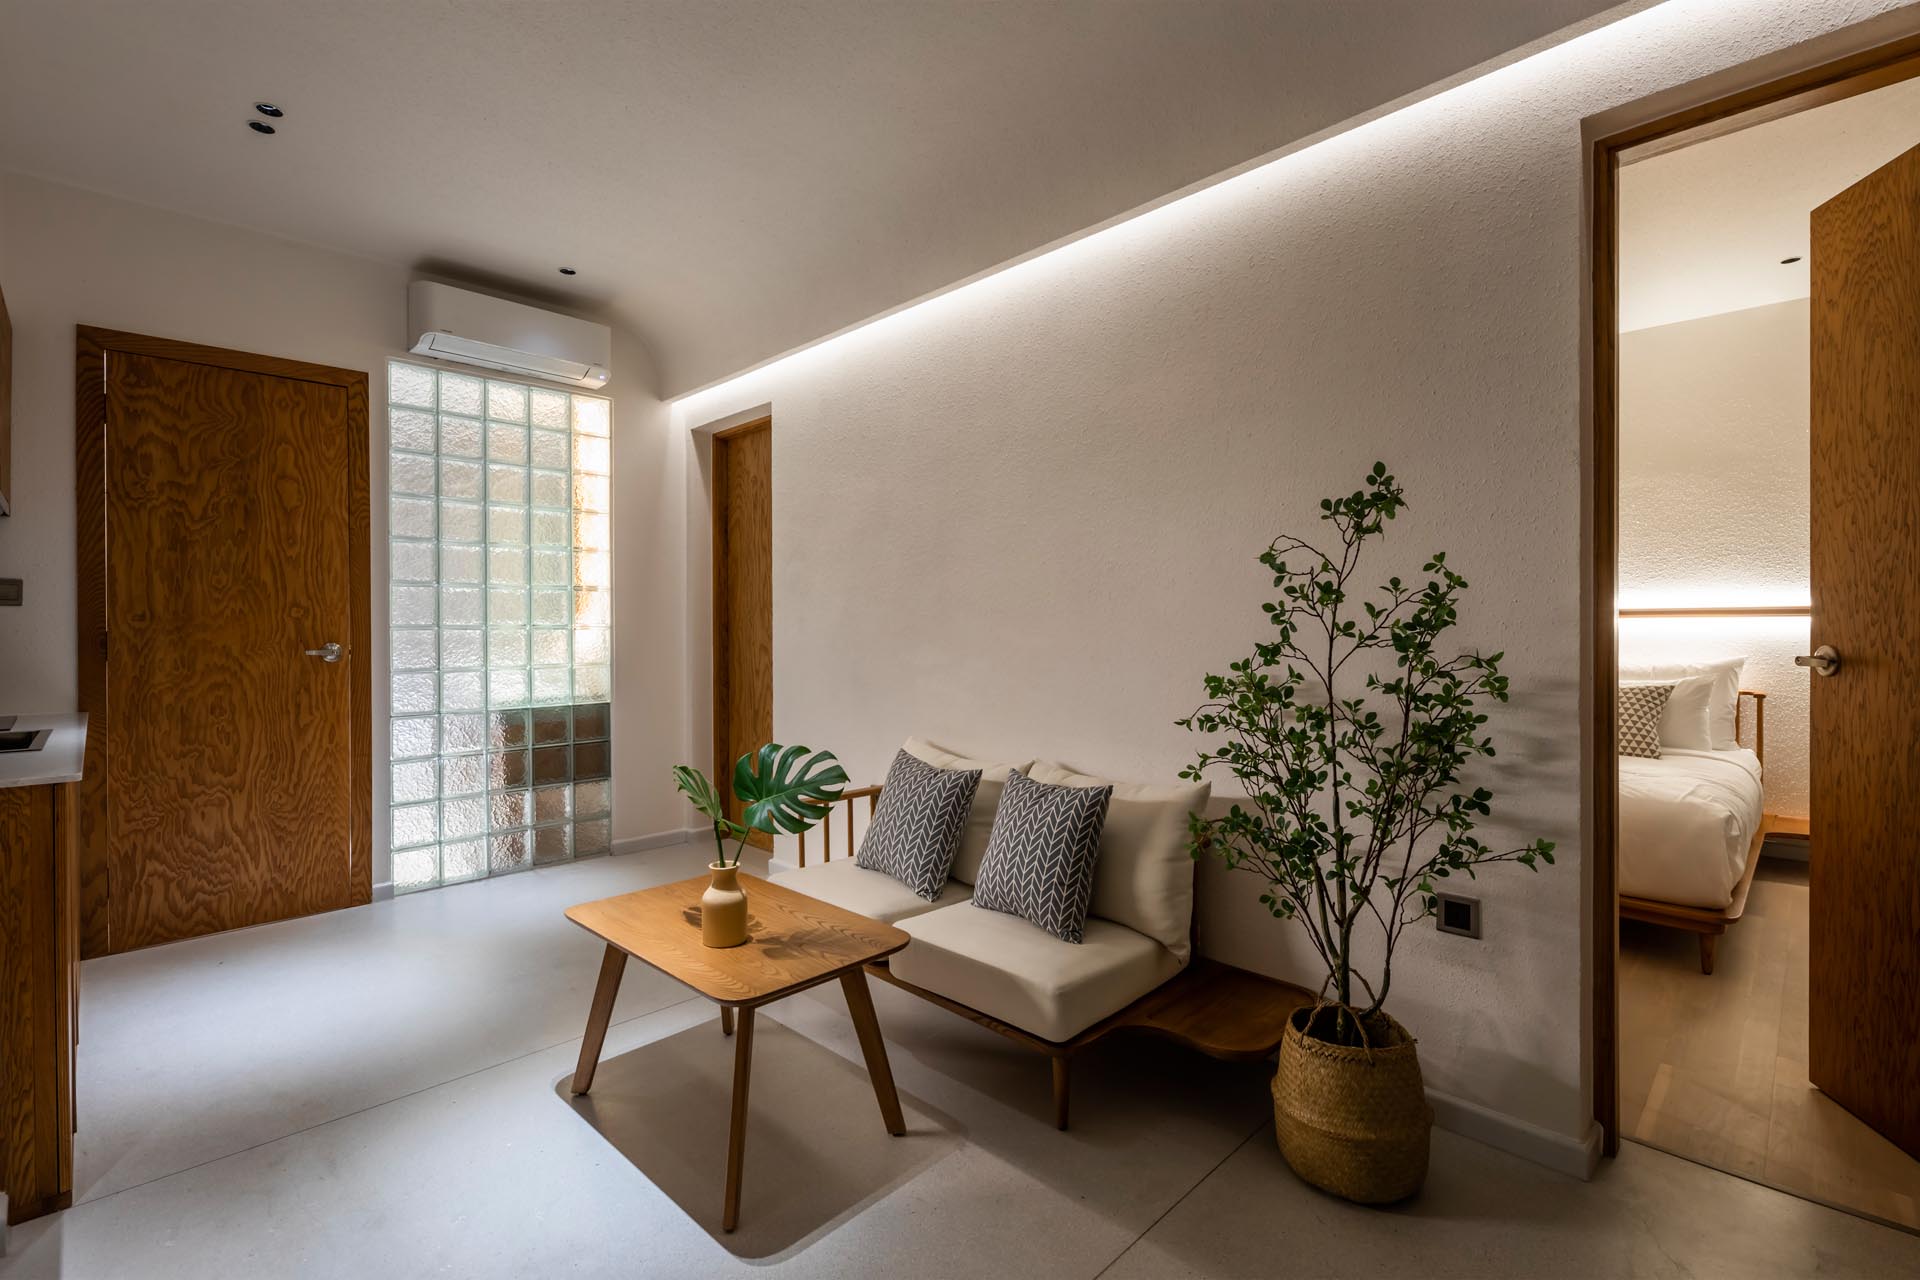 A minimalist apartment interior with LED lighting and a small living room.